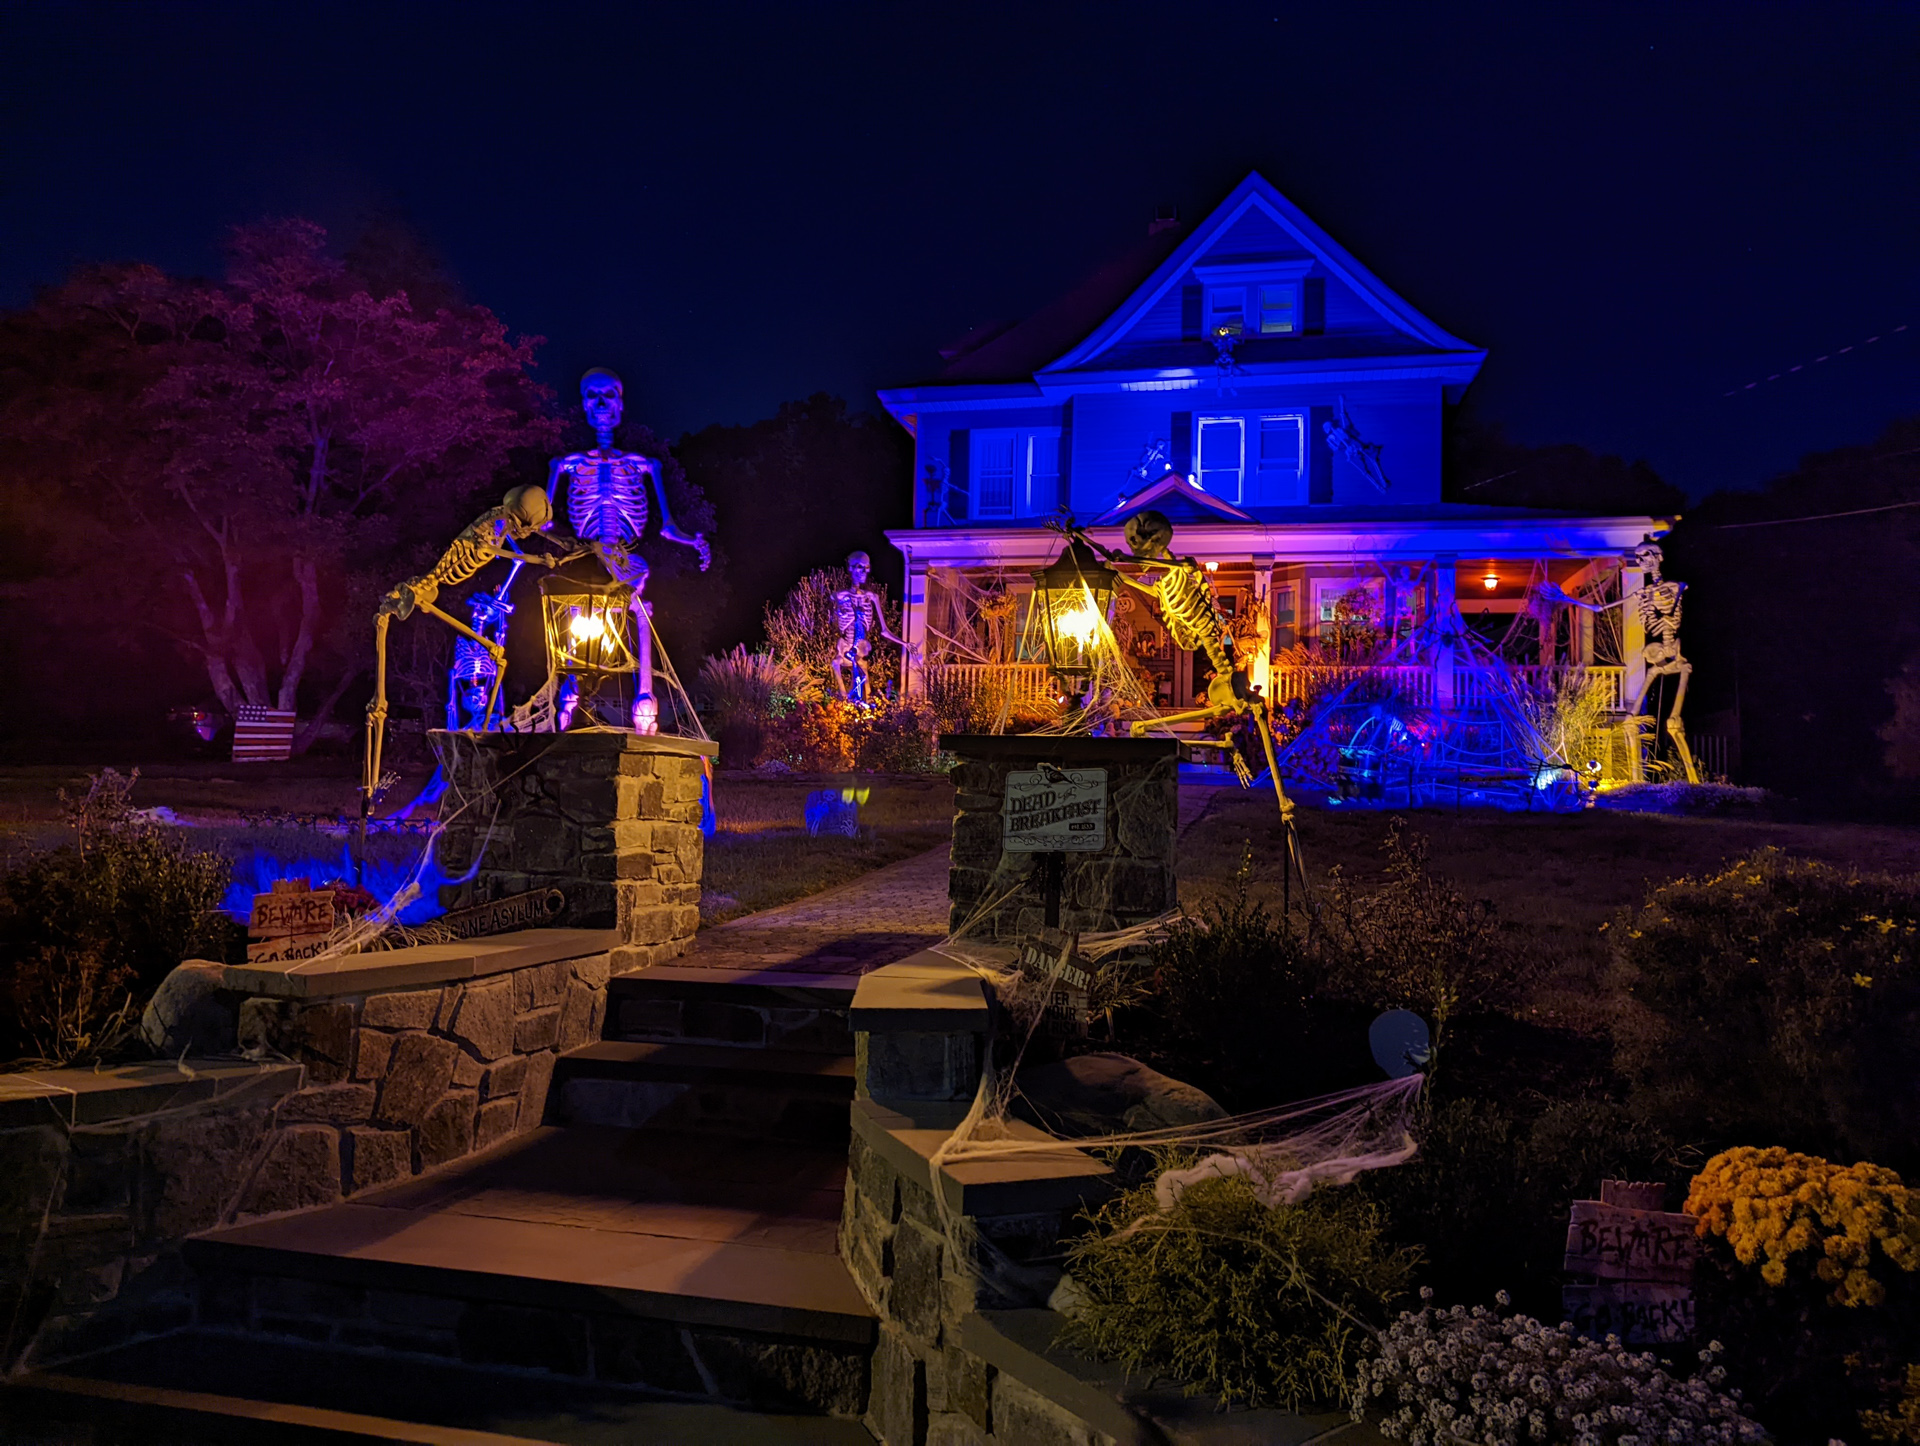 Google Pixel 6 Pro camera sample halloween night shot of the front of a house with lights